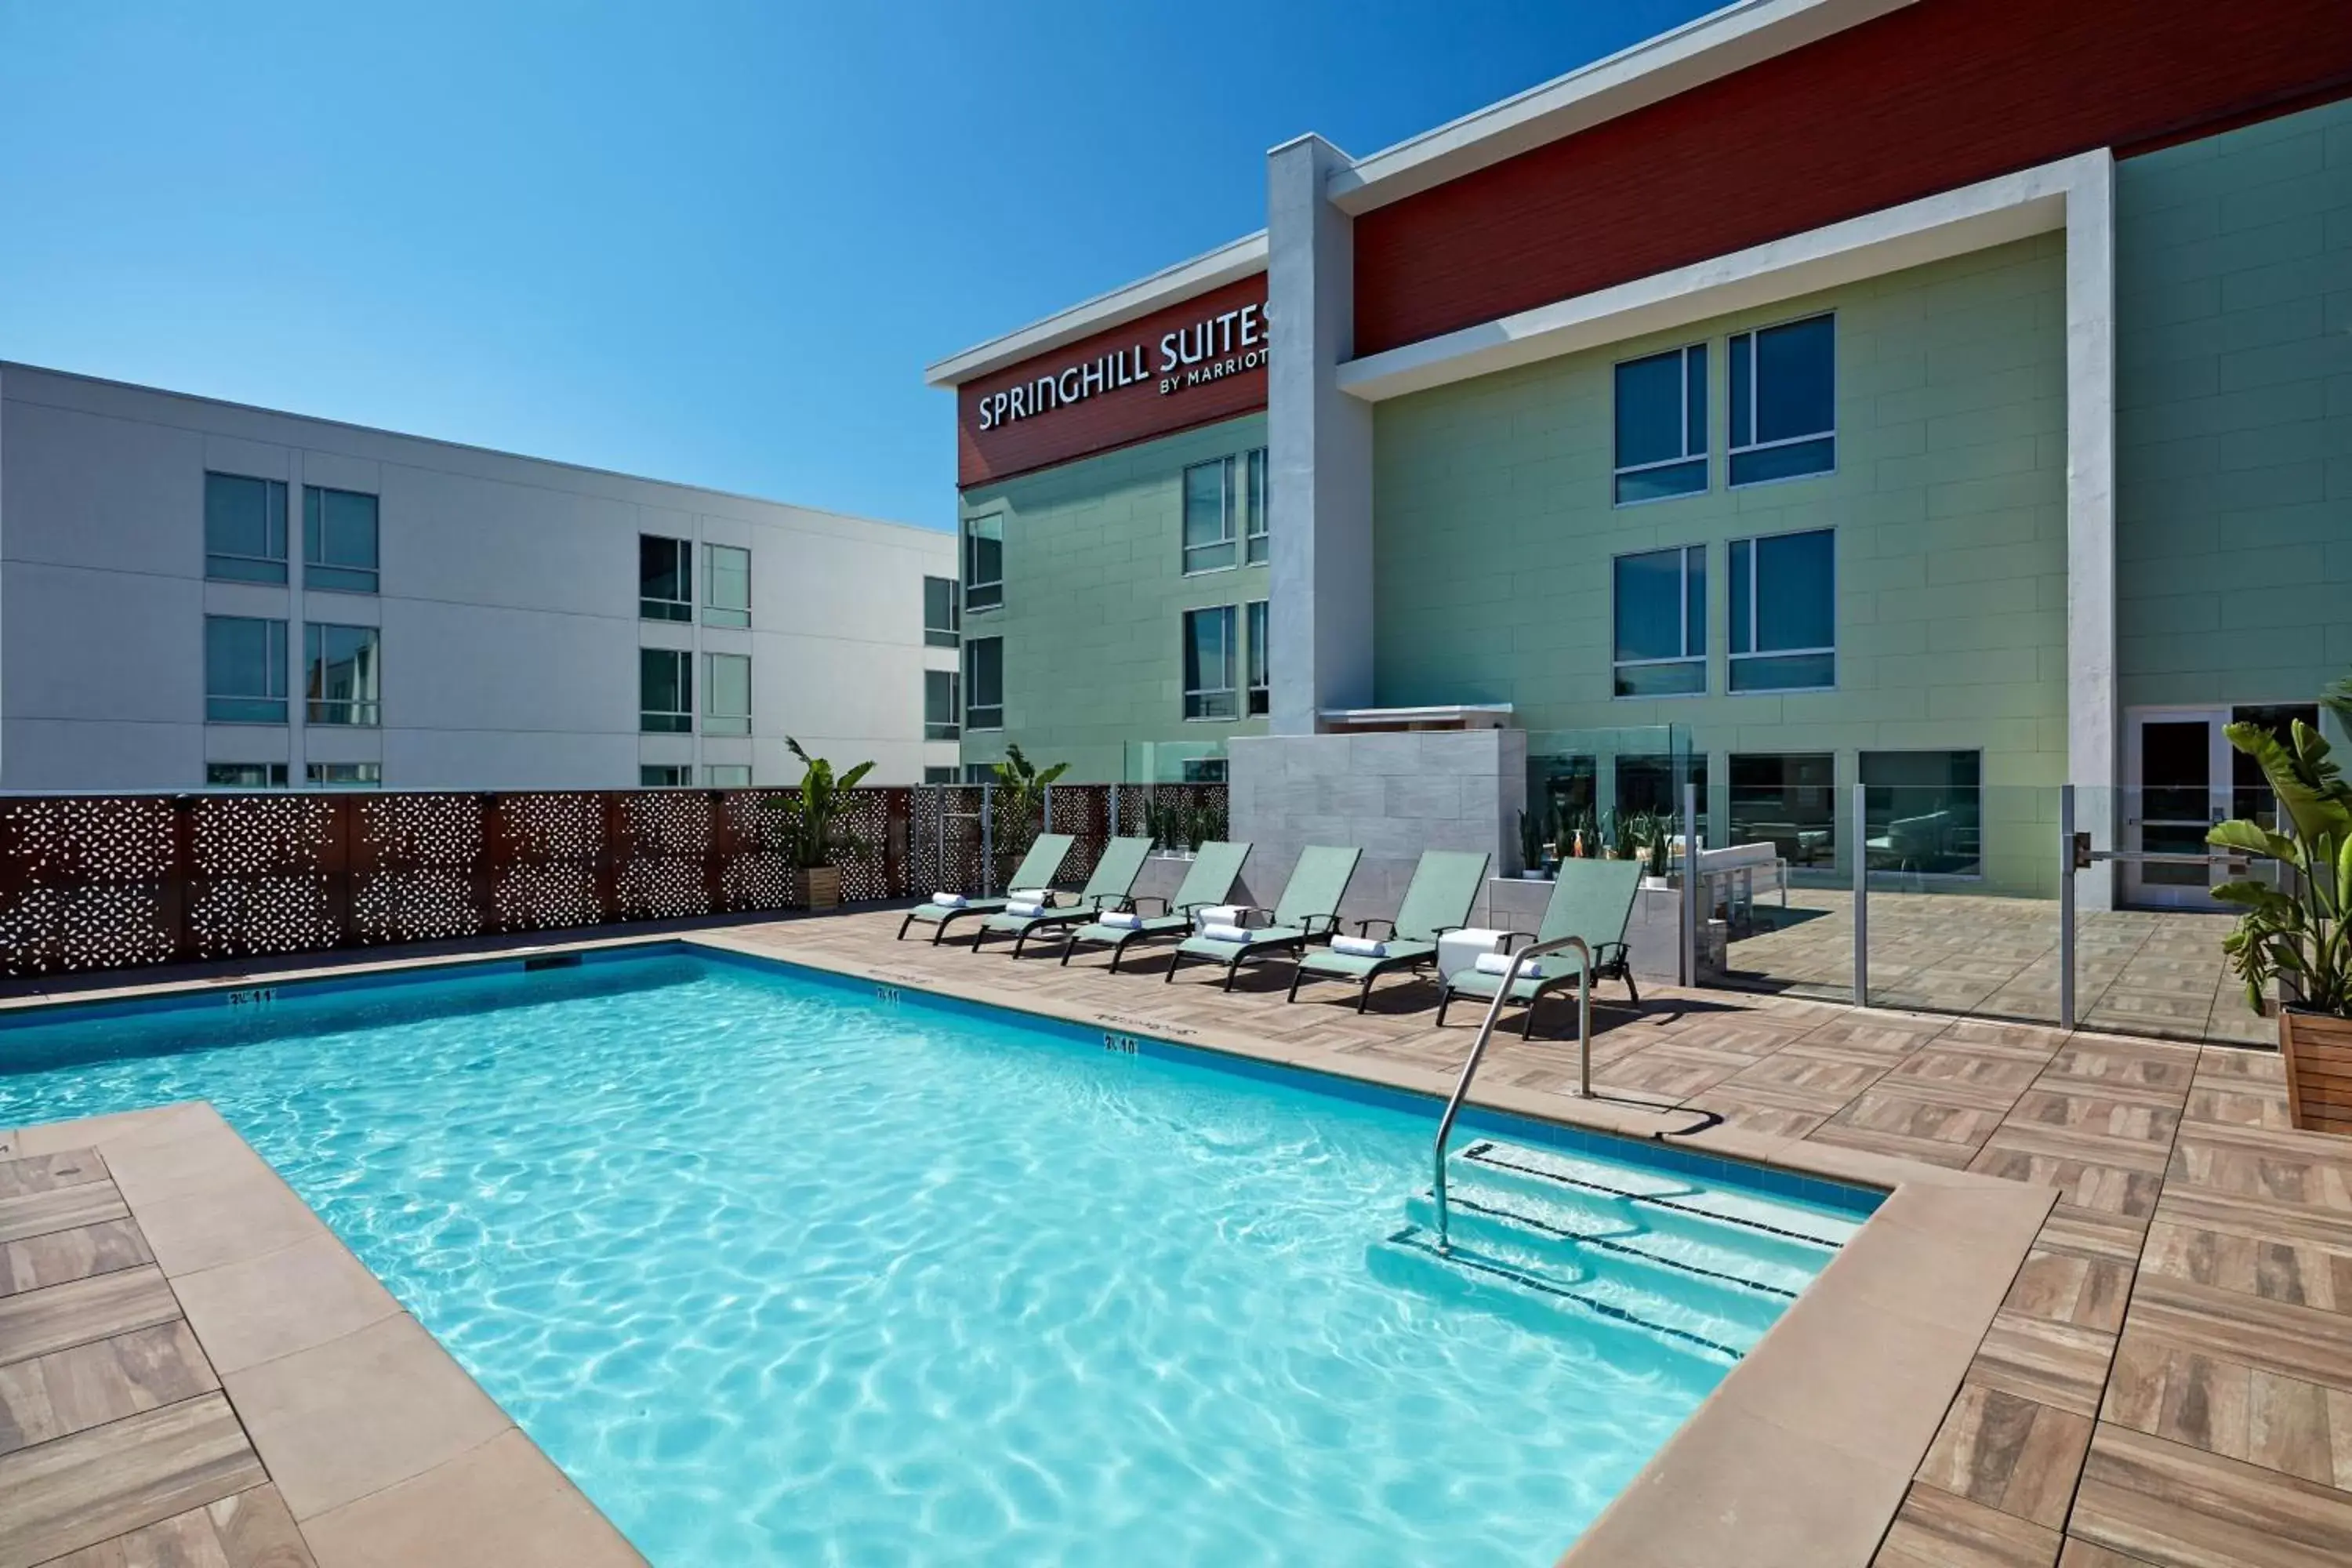 Swimming pool, Property Building in SpringHill Suites by Marriott Los Angeles Downey